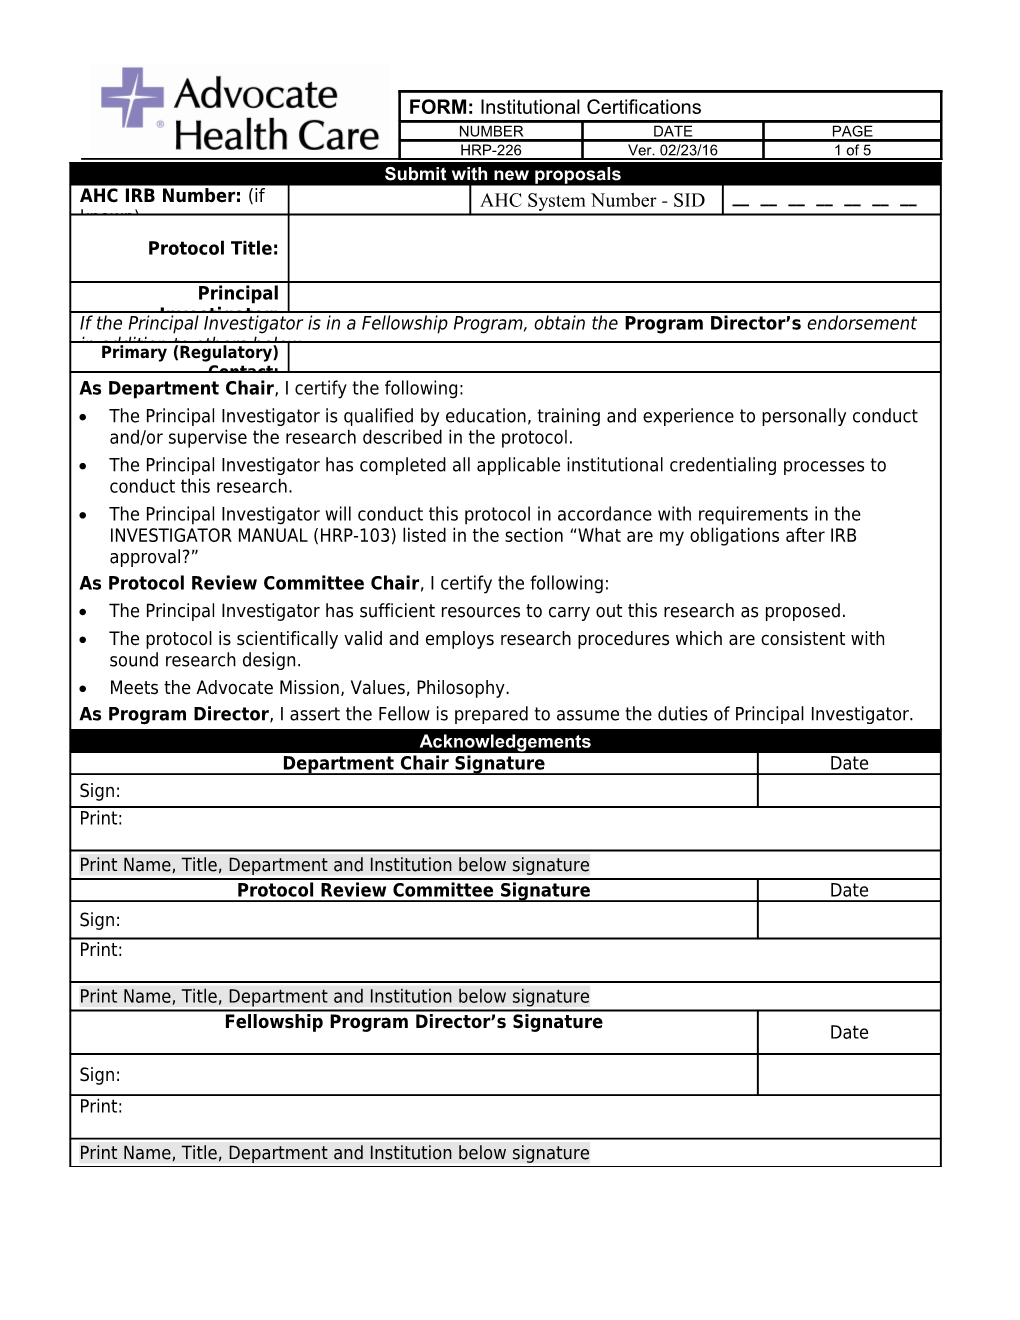 FORM: Application for Initial Review